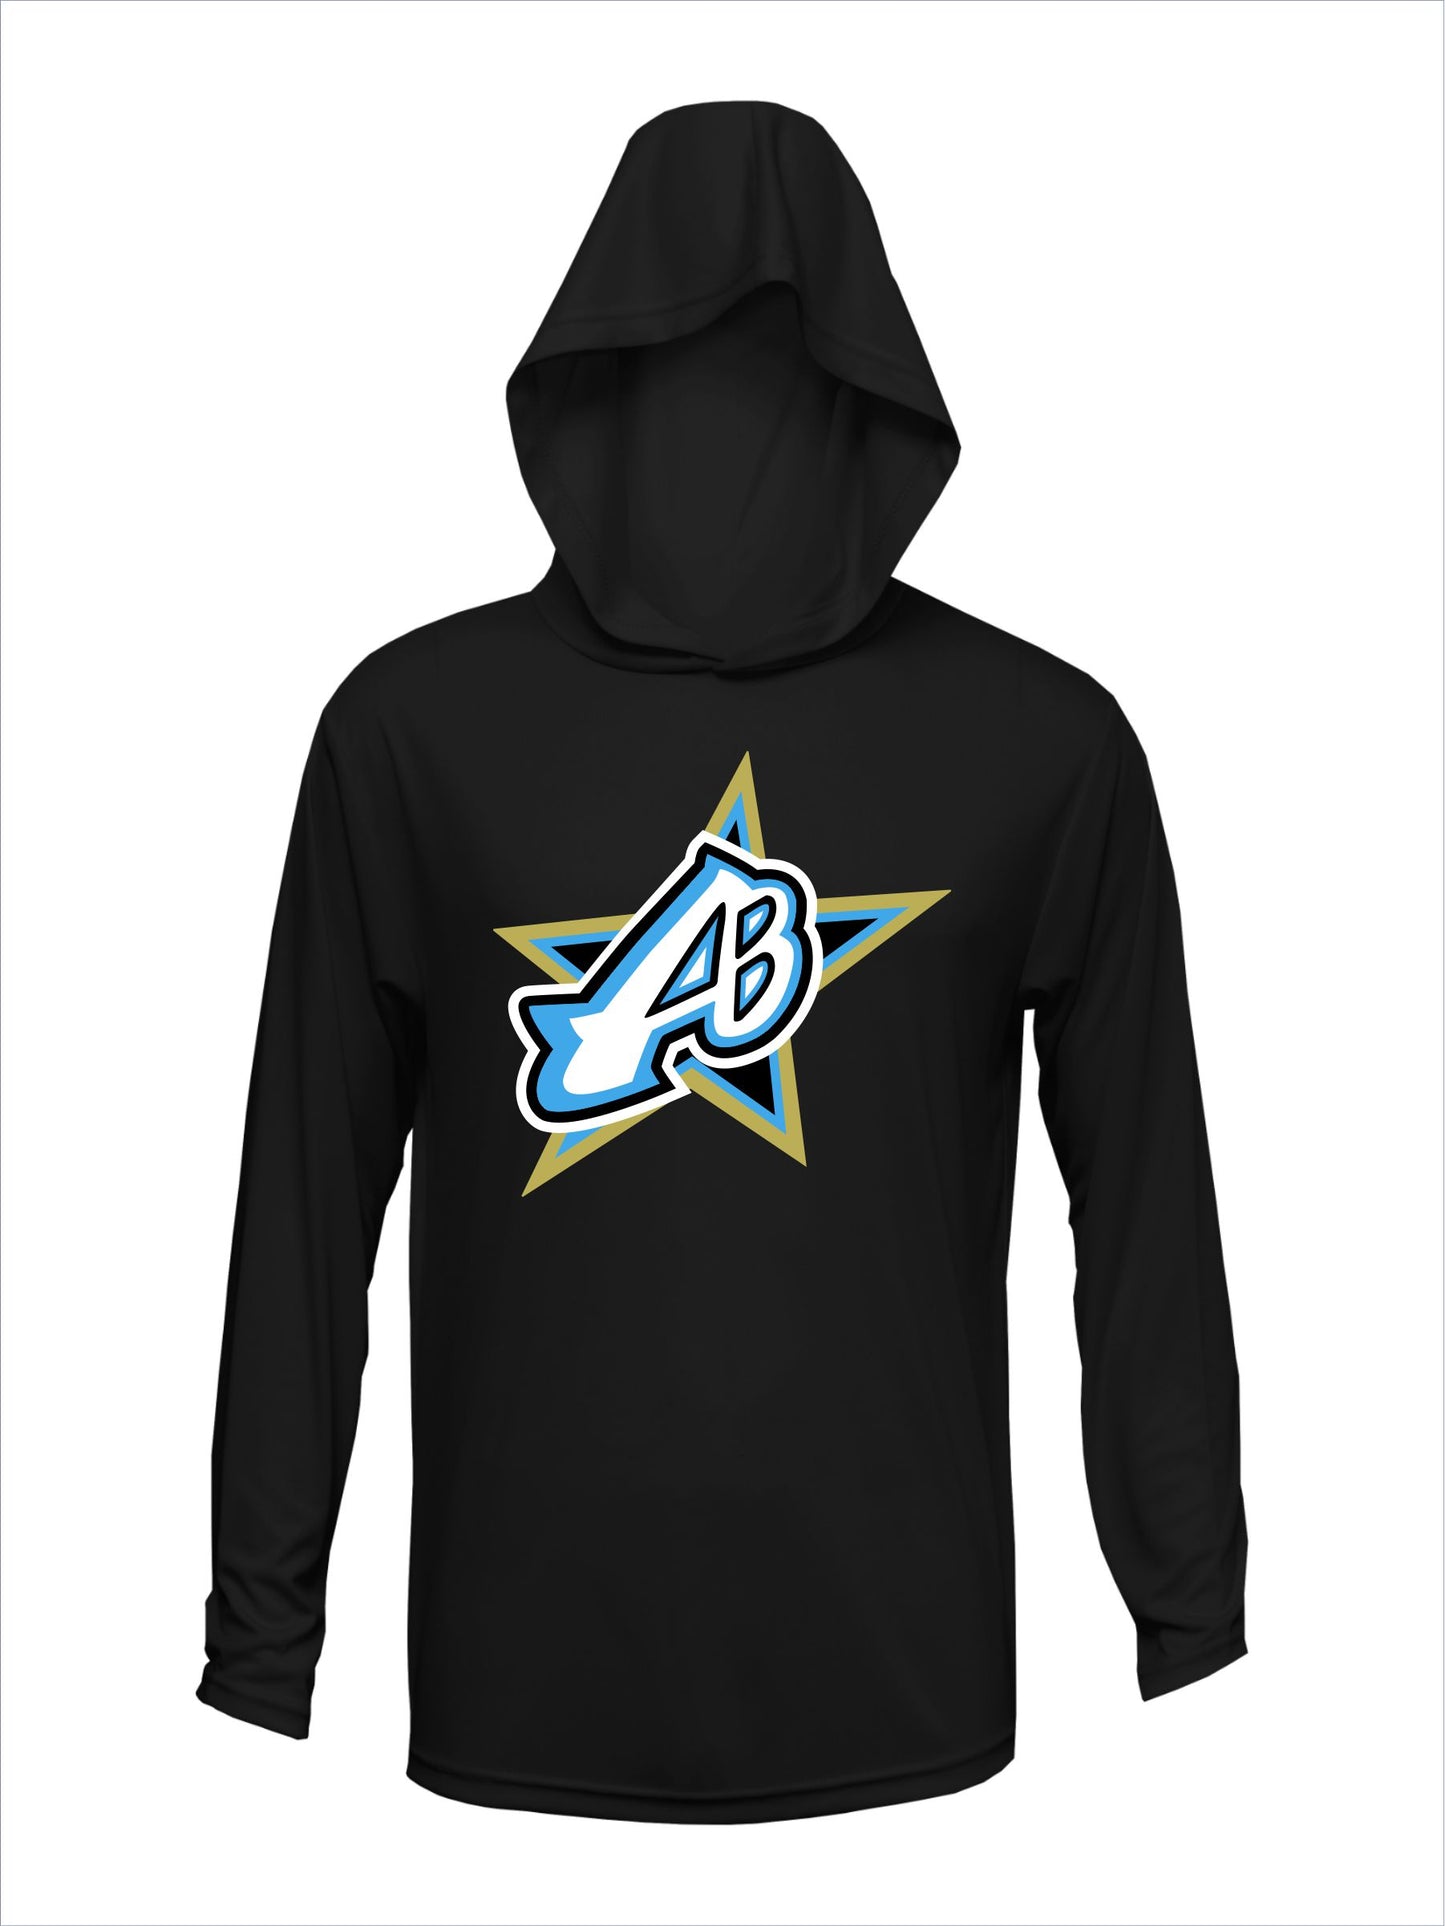 Long Sleeve "Centered Logo" Dri-Fit T-Shirt with Hood